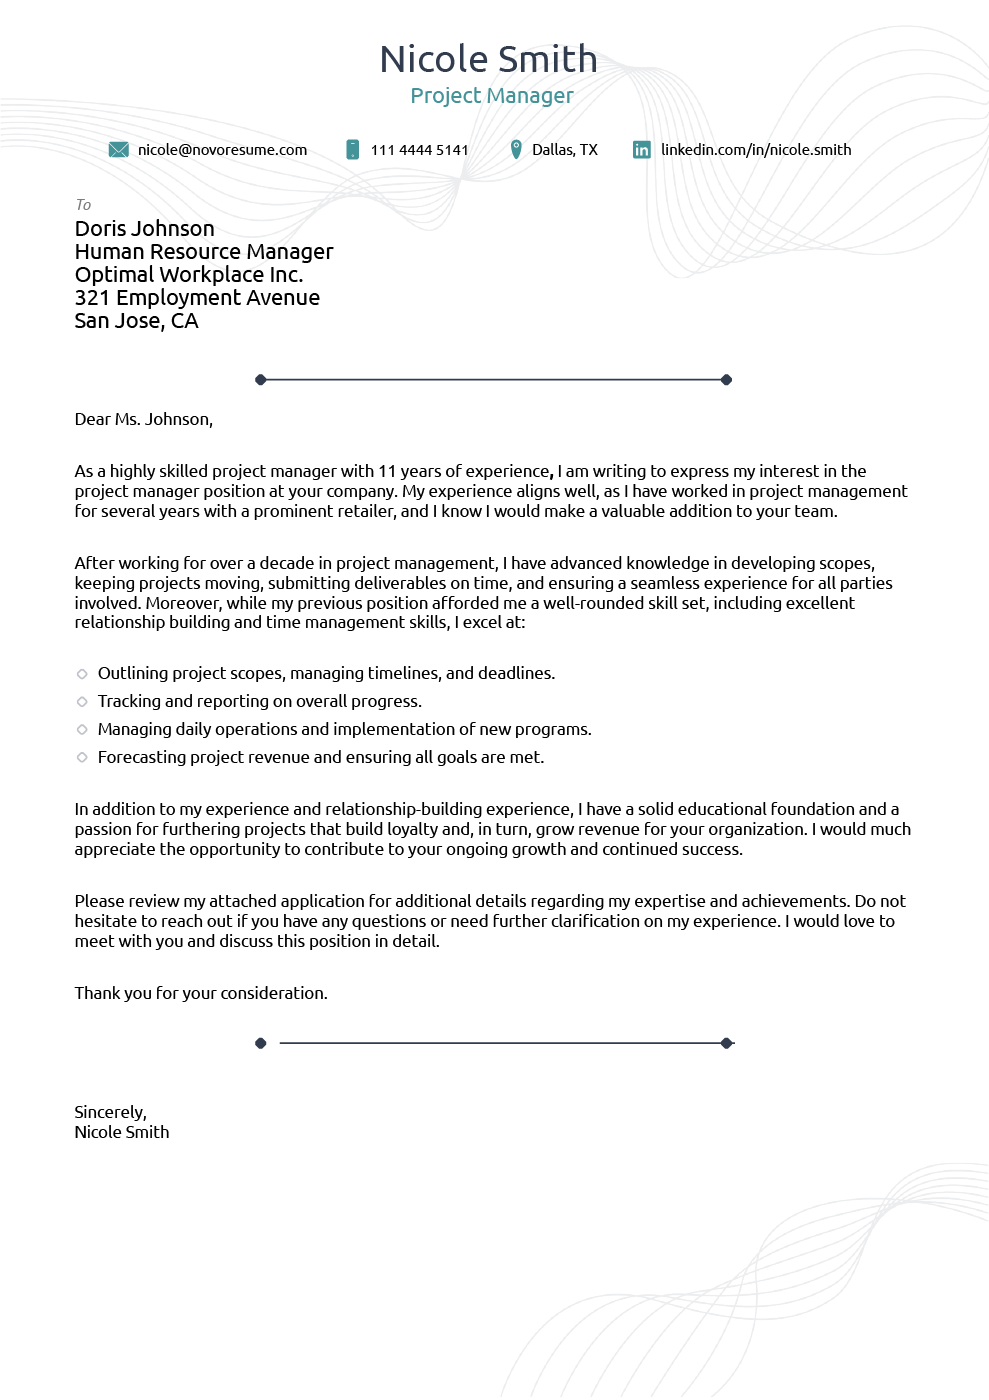 Presentation letter for a company